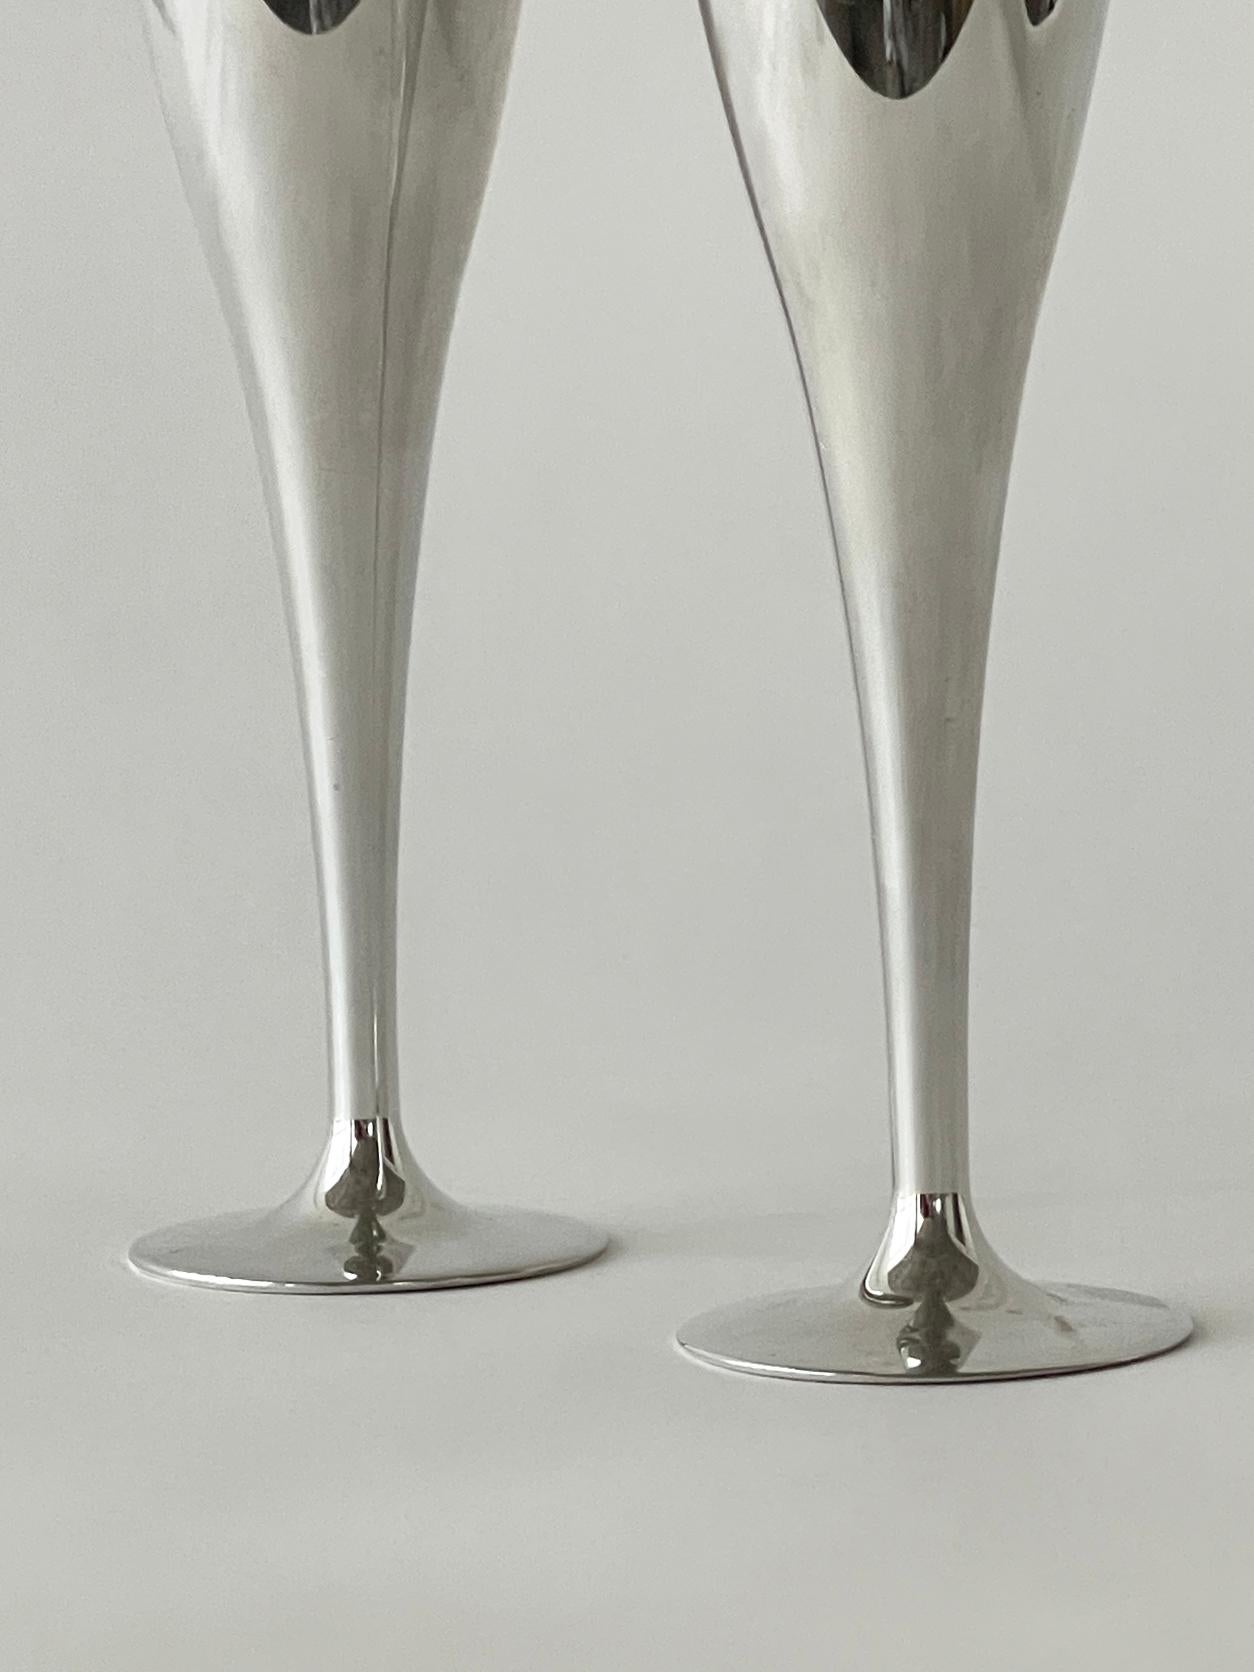 Unknown 20th Century, Nambe Aluminum Champagne Glasses